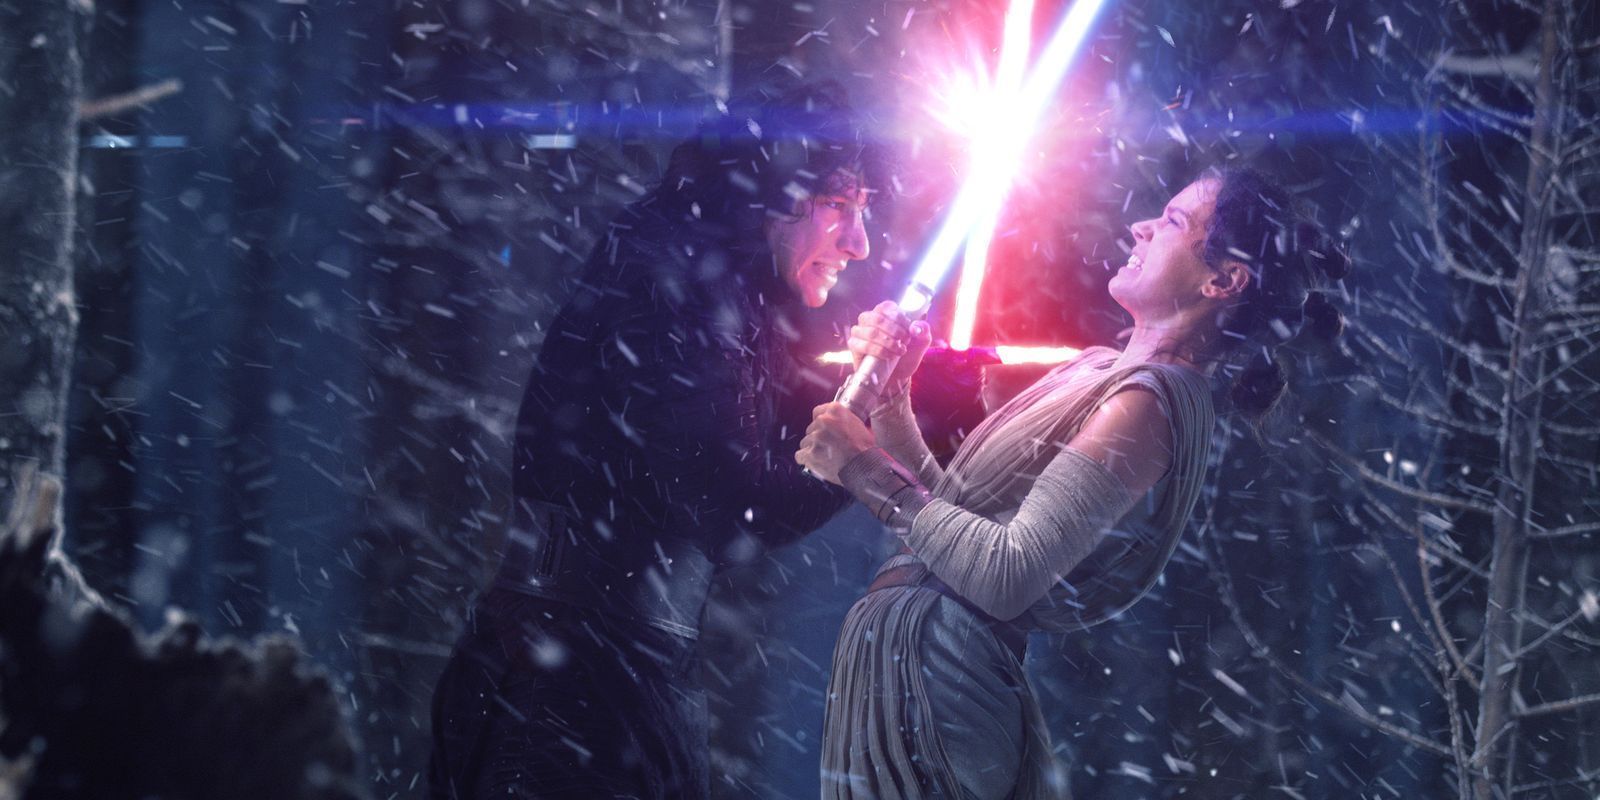 Kylo Ren and Rey battling with lightsabers in the snow in Star Wars